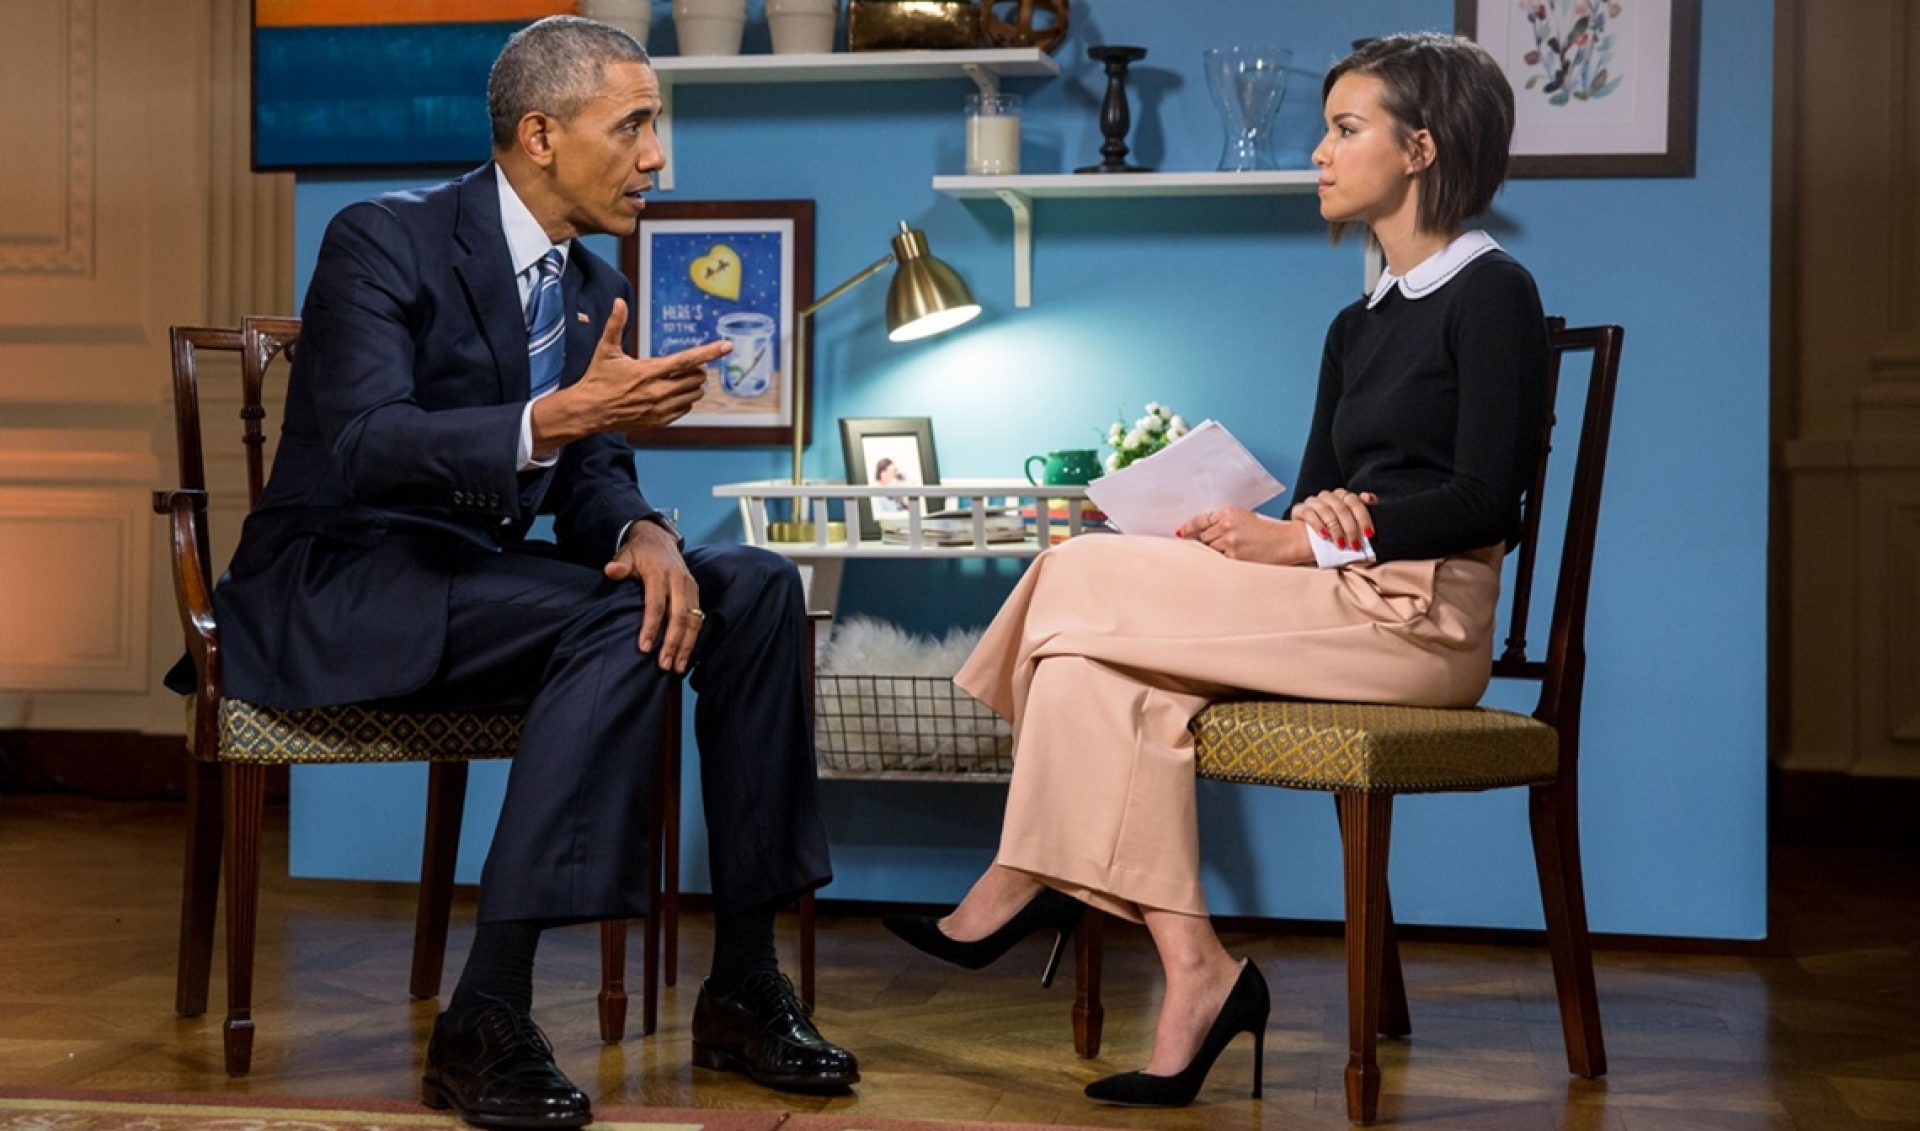 YouTube’s Latest Interview With President Obama Draws Over One Million Views